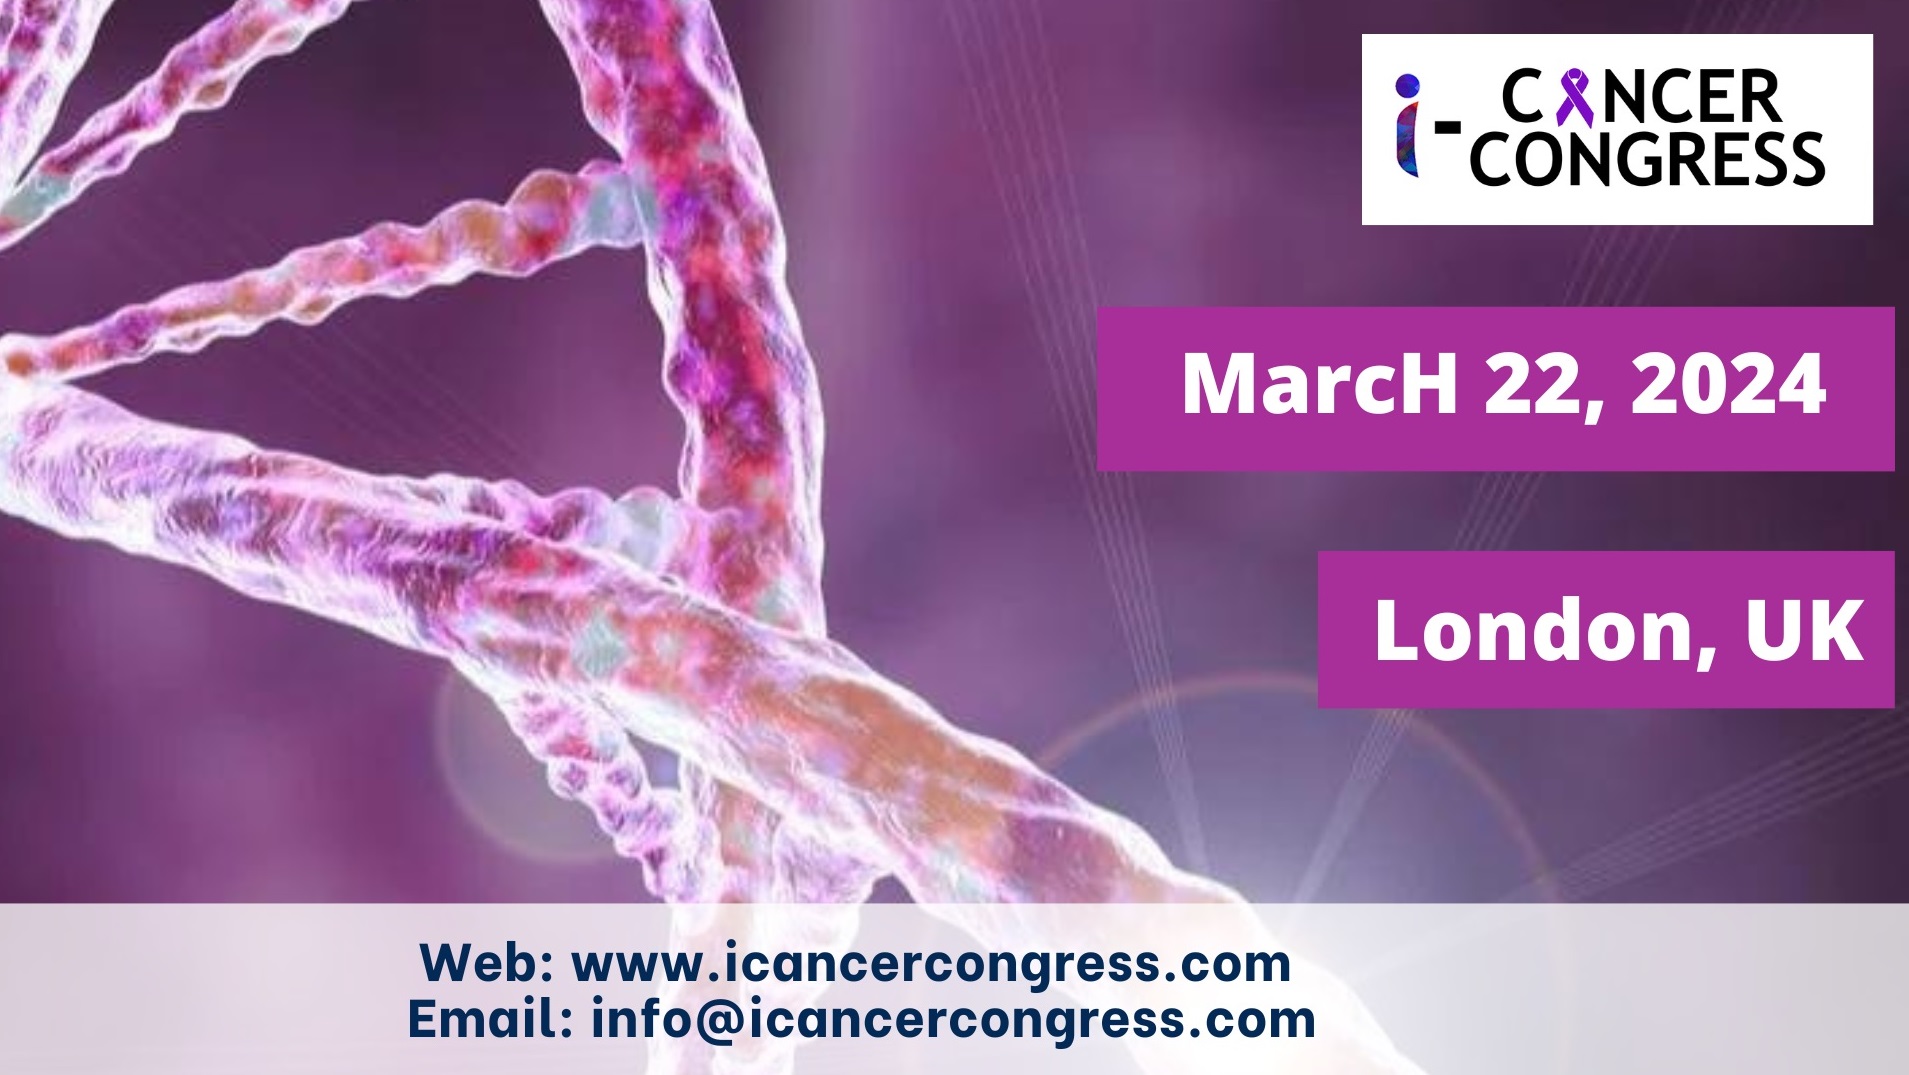 International Cancer Research and Drug Discovery Conference I-cancer Congress 